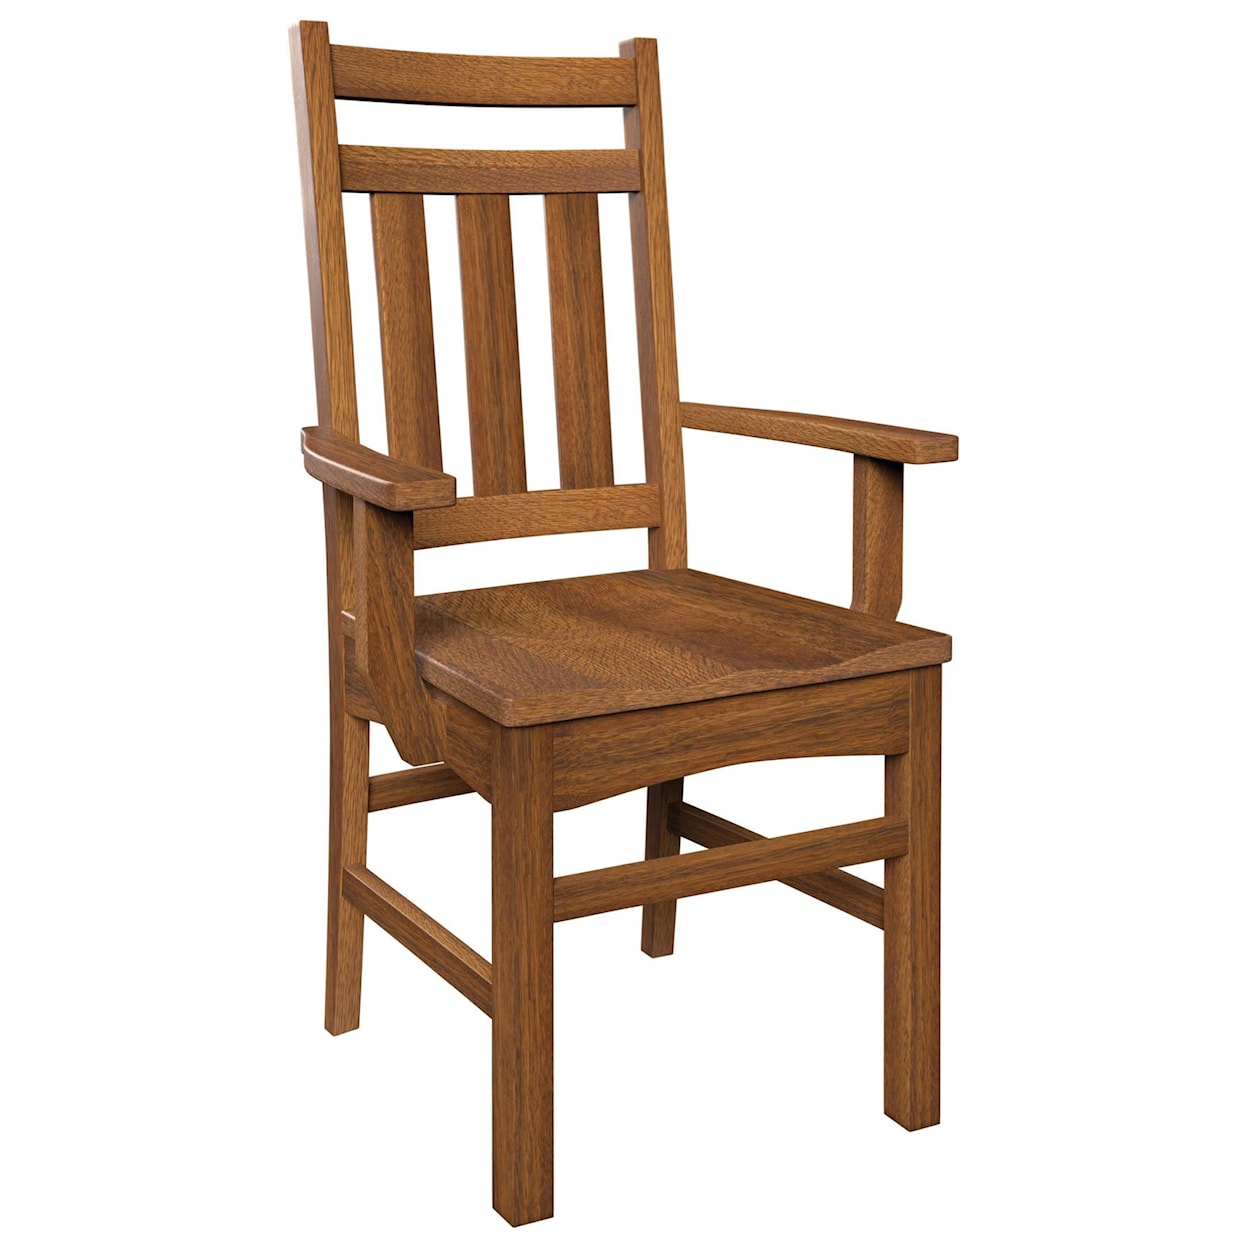 Wengerd Wood Products Montreal Arm Chair